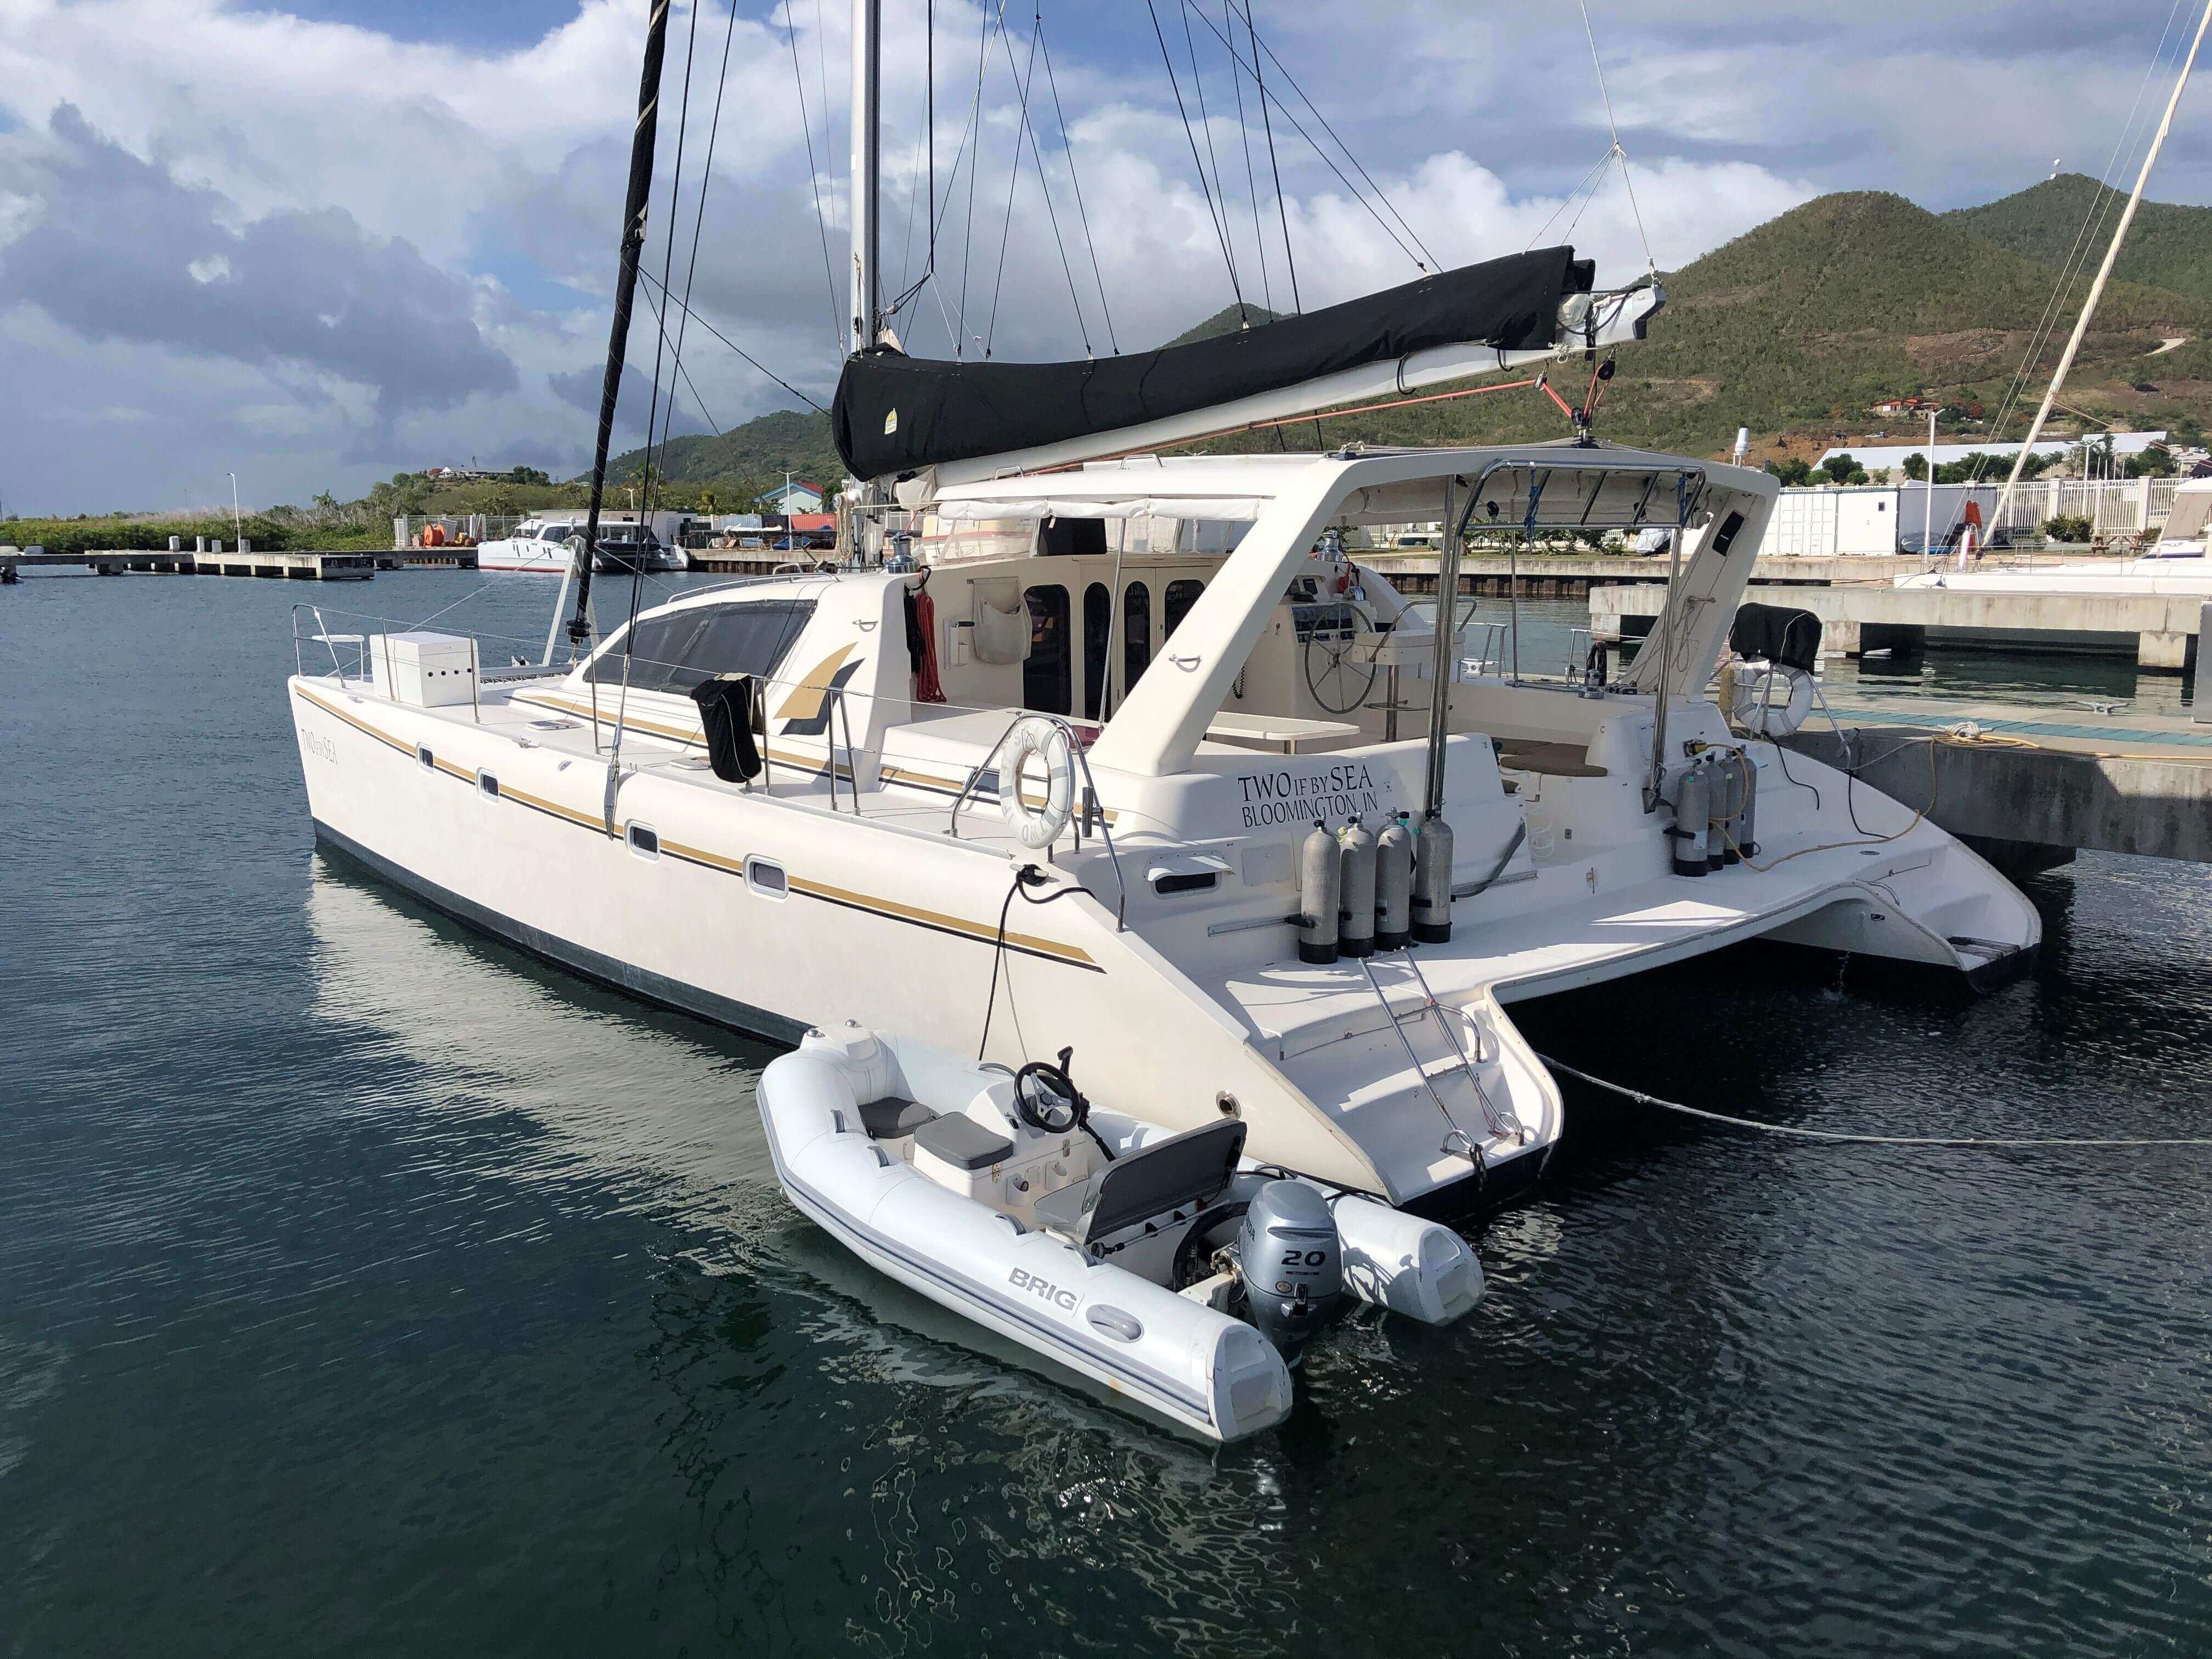 Used Sail Catamaran for Sale 2000 Leopard 45 Boat Highlights